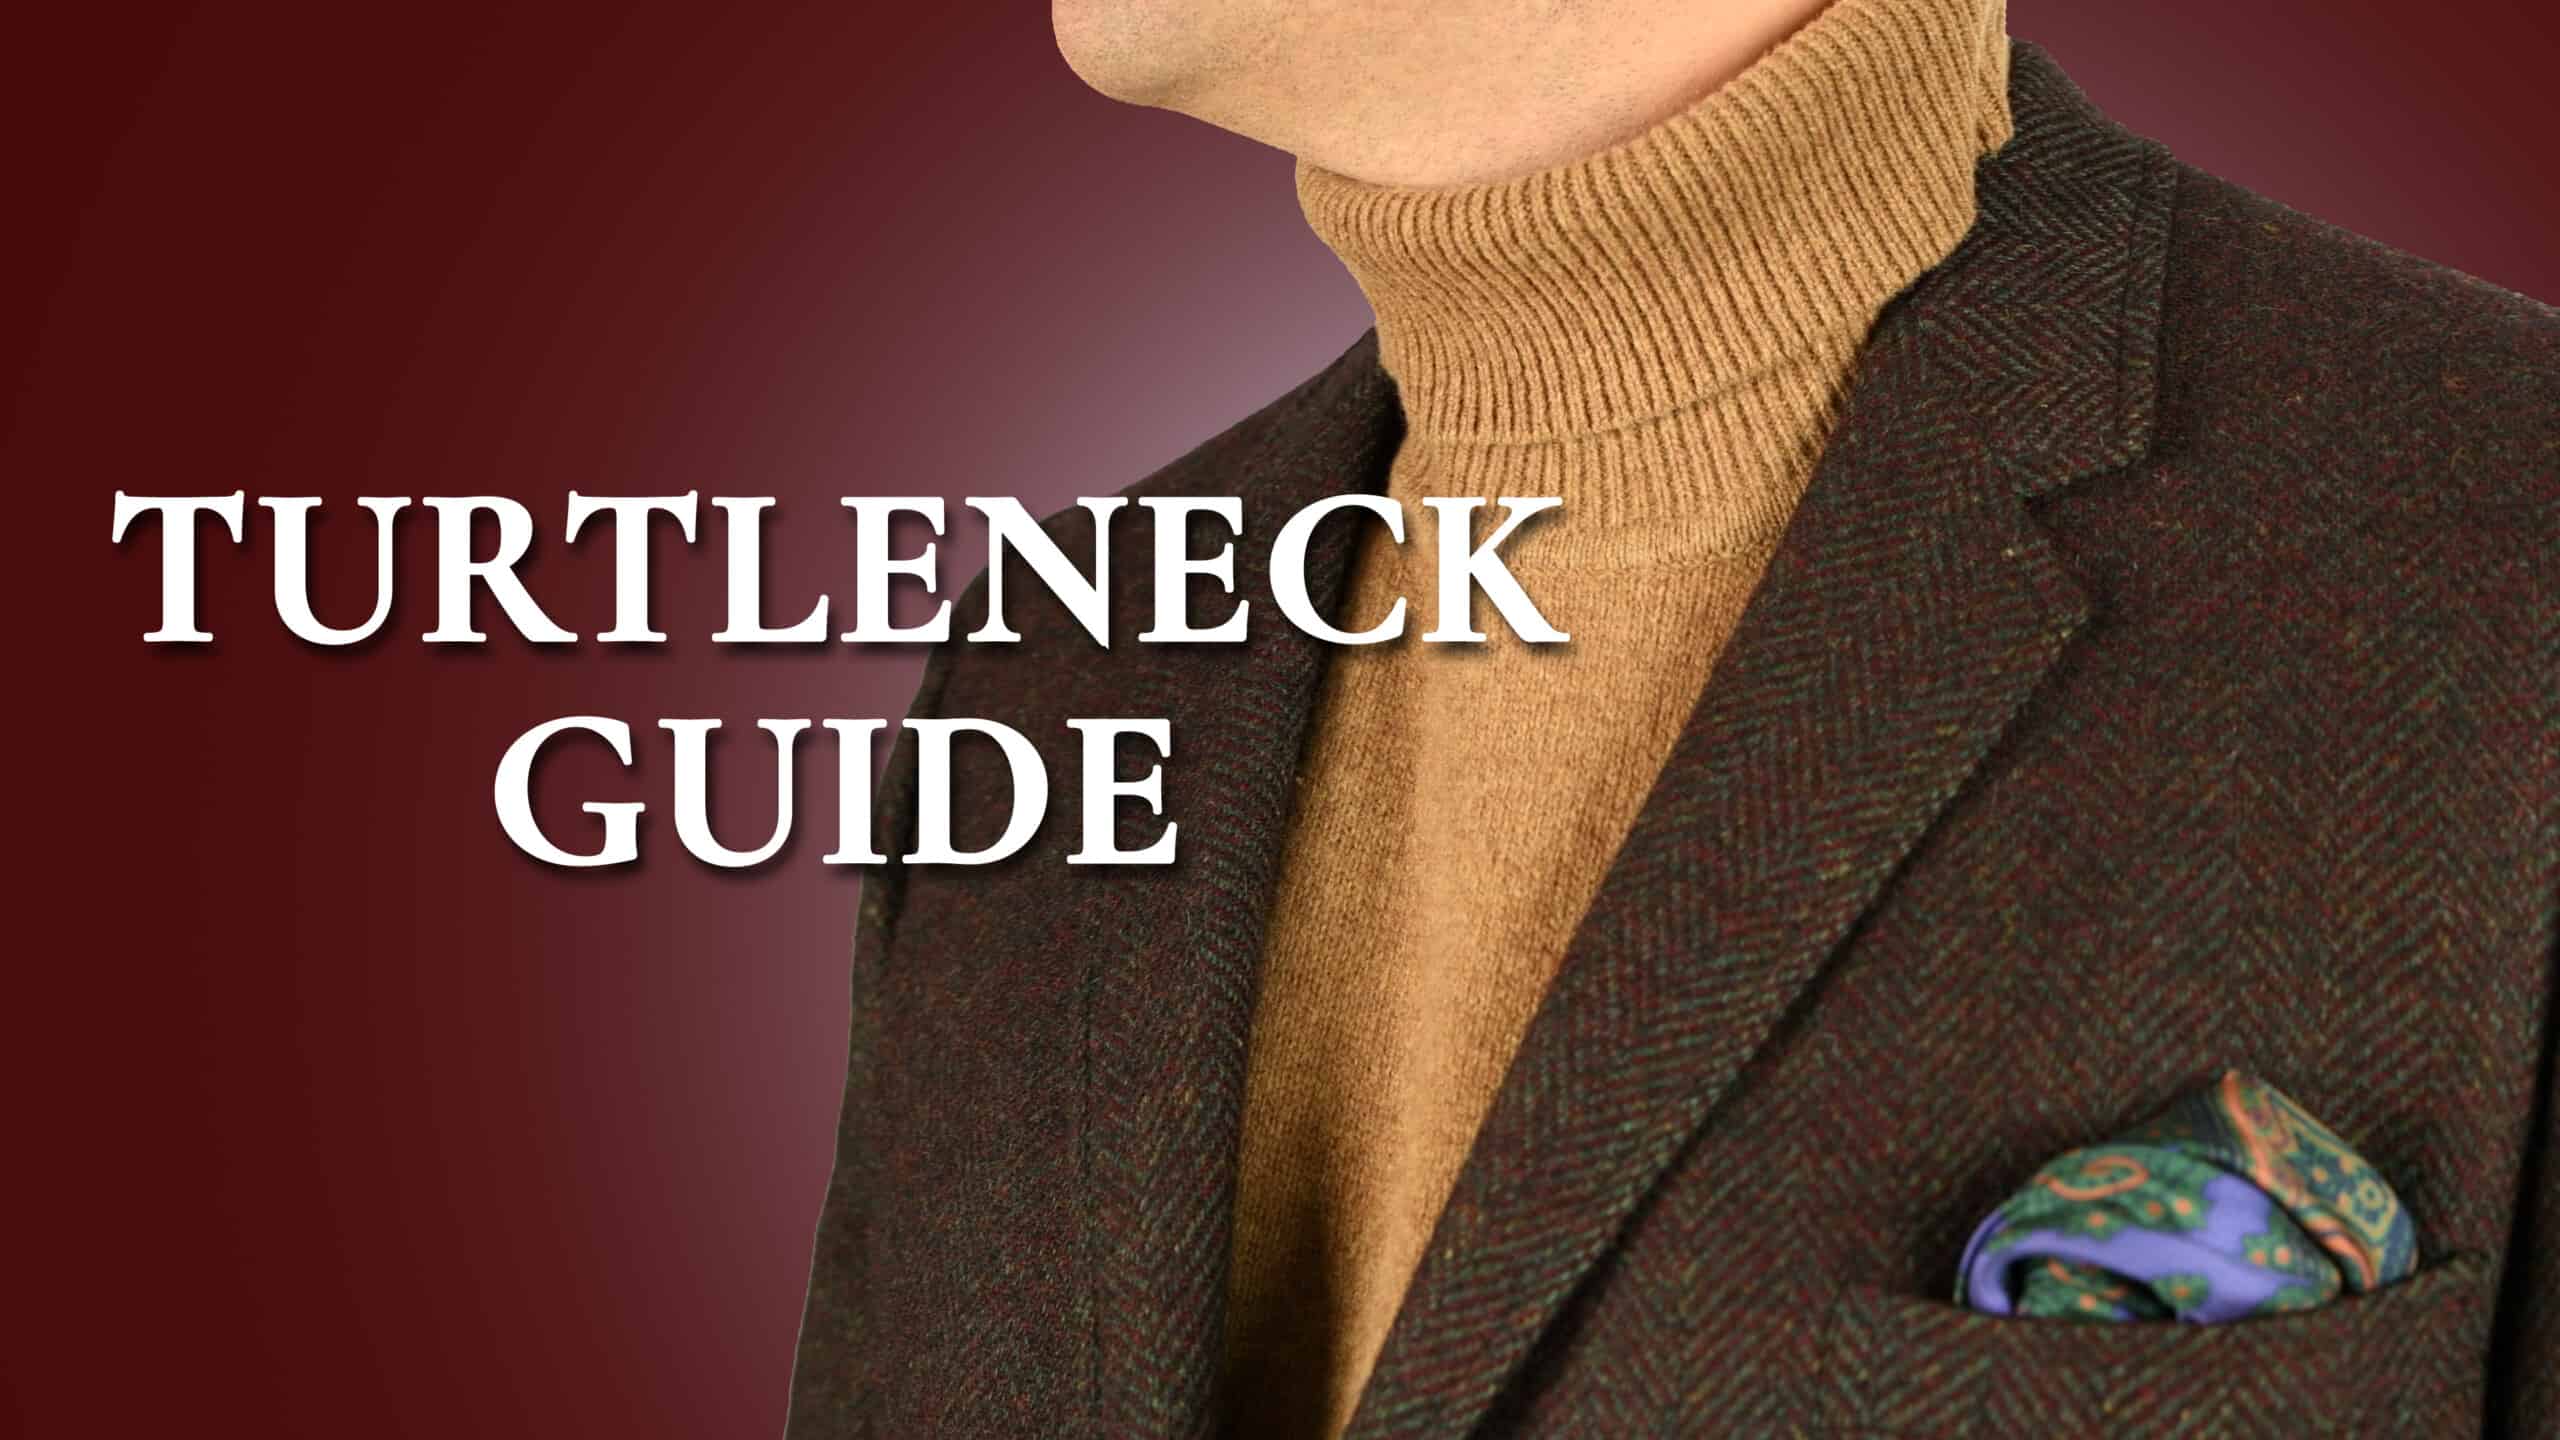 turtleneck guide 3840x2160 wp scaled